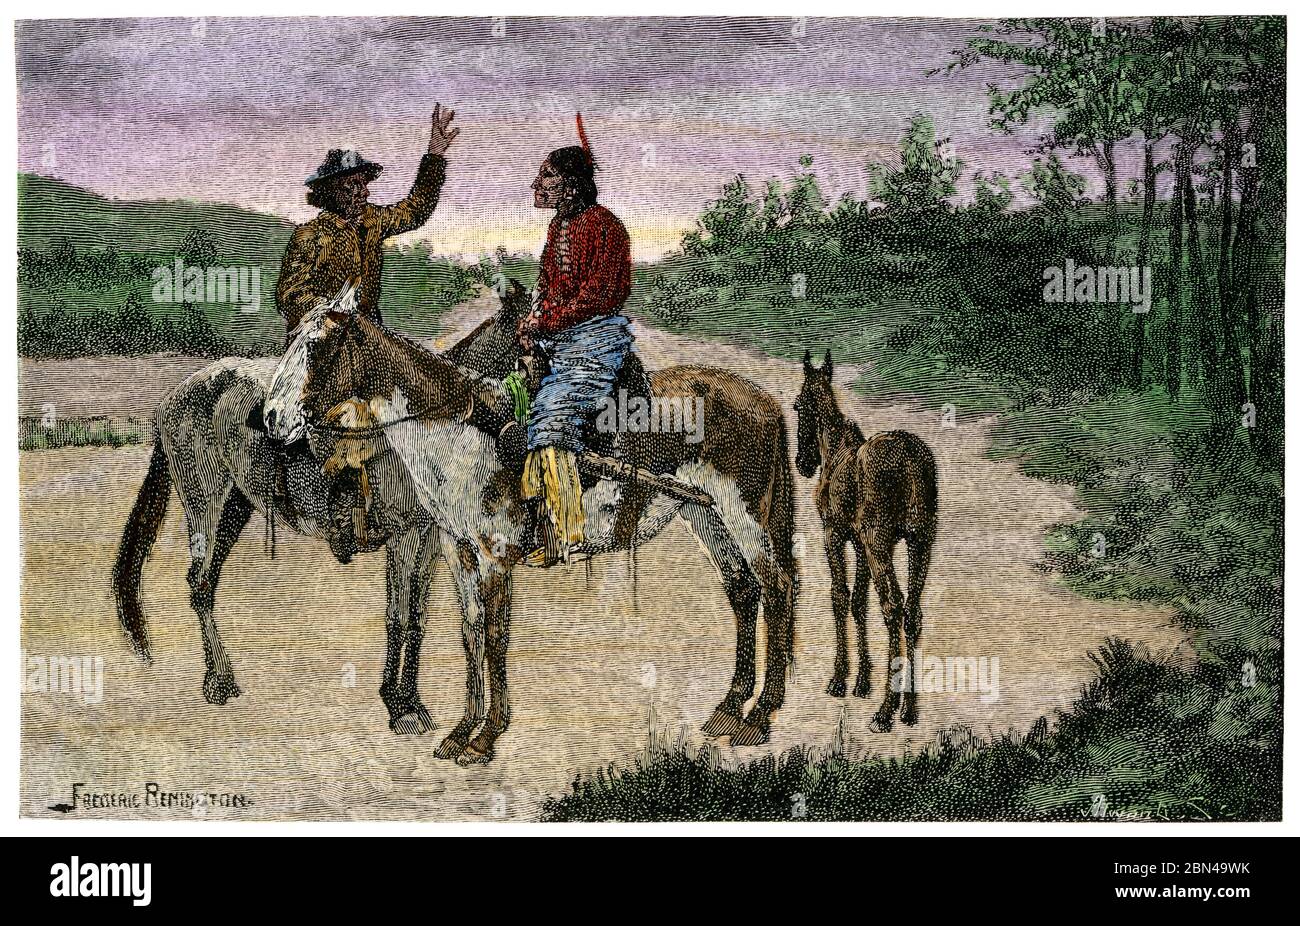 Native Americans from different tribes using sign language, 1800s. Hand-colored woodcut of a Frederic Remington illustration Stock Photo